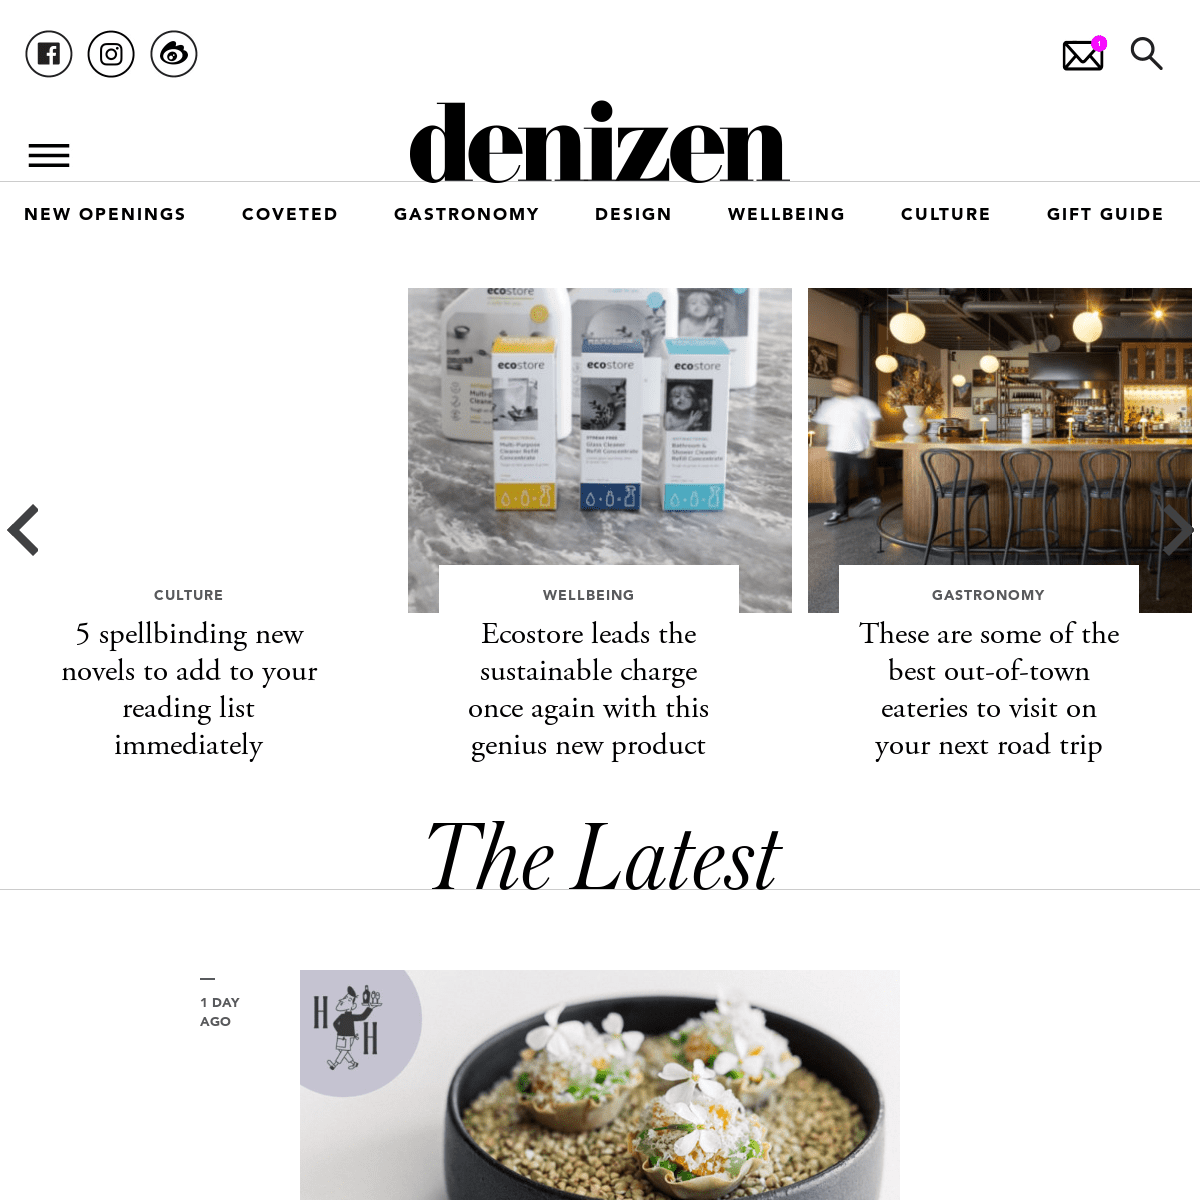 A complete backup of https://thedenizen.co.nz